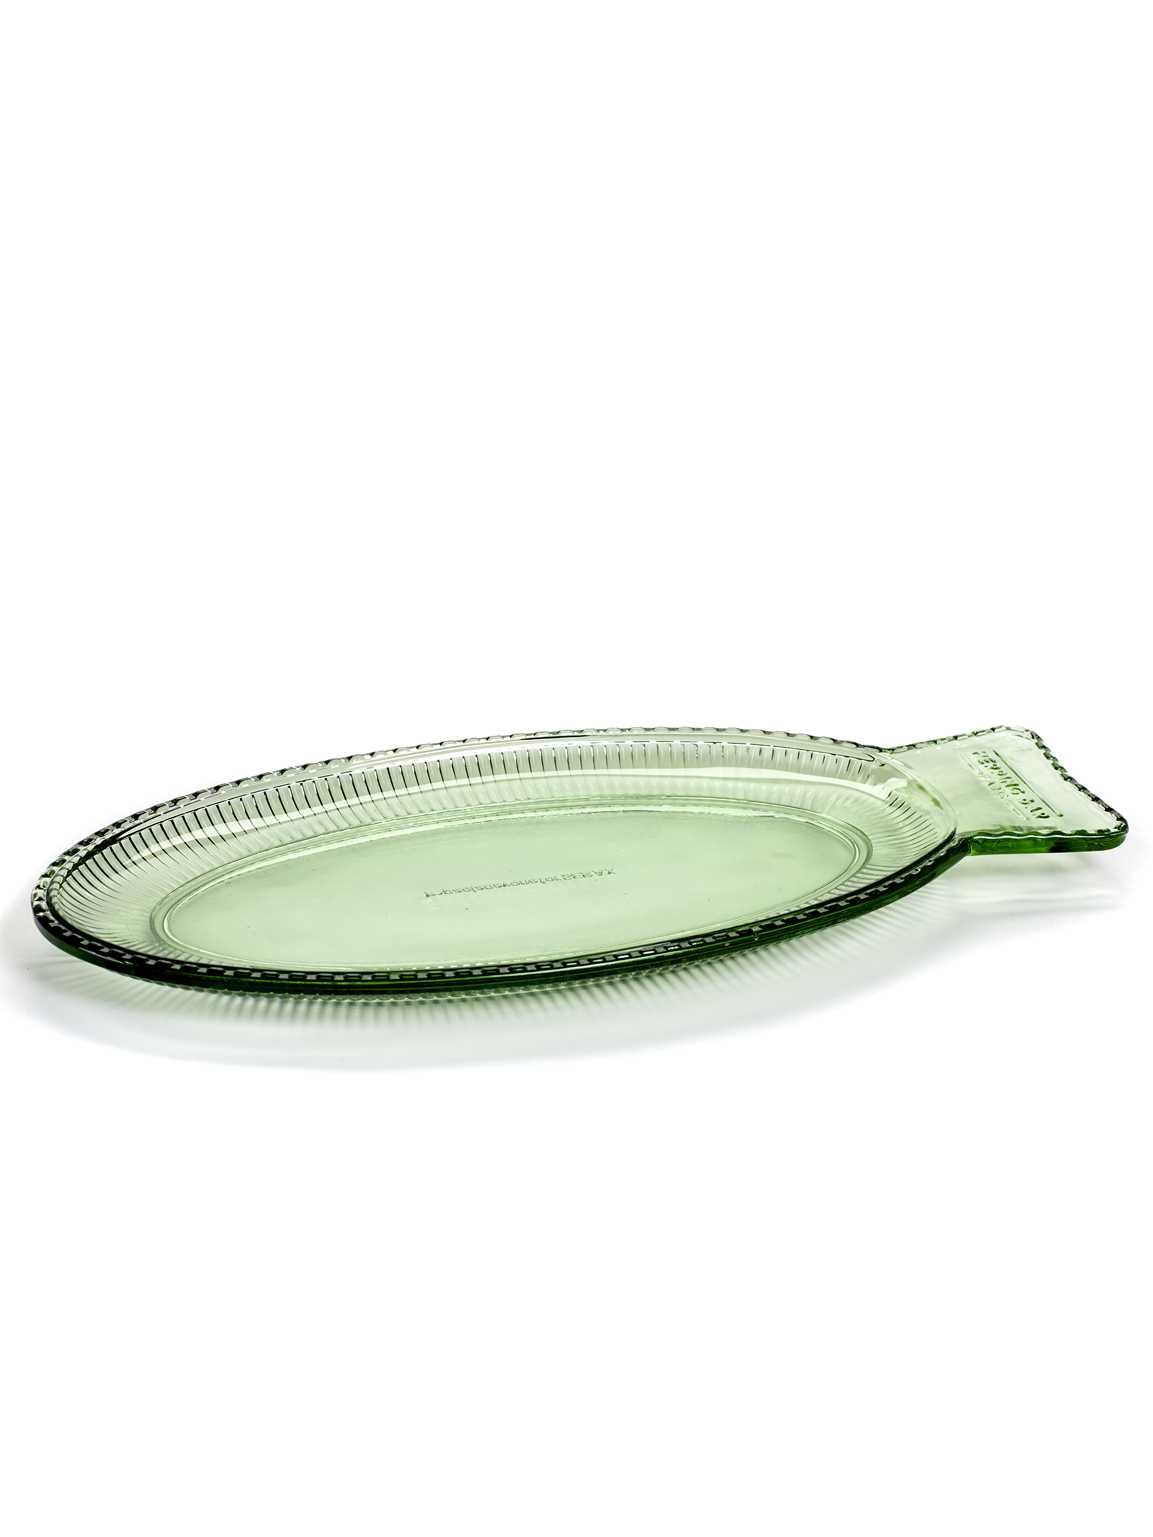 a picture of  Flat Fish Dish on makers and merchants website